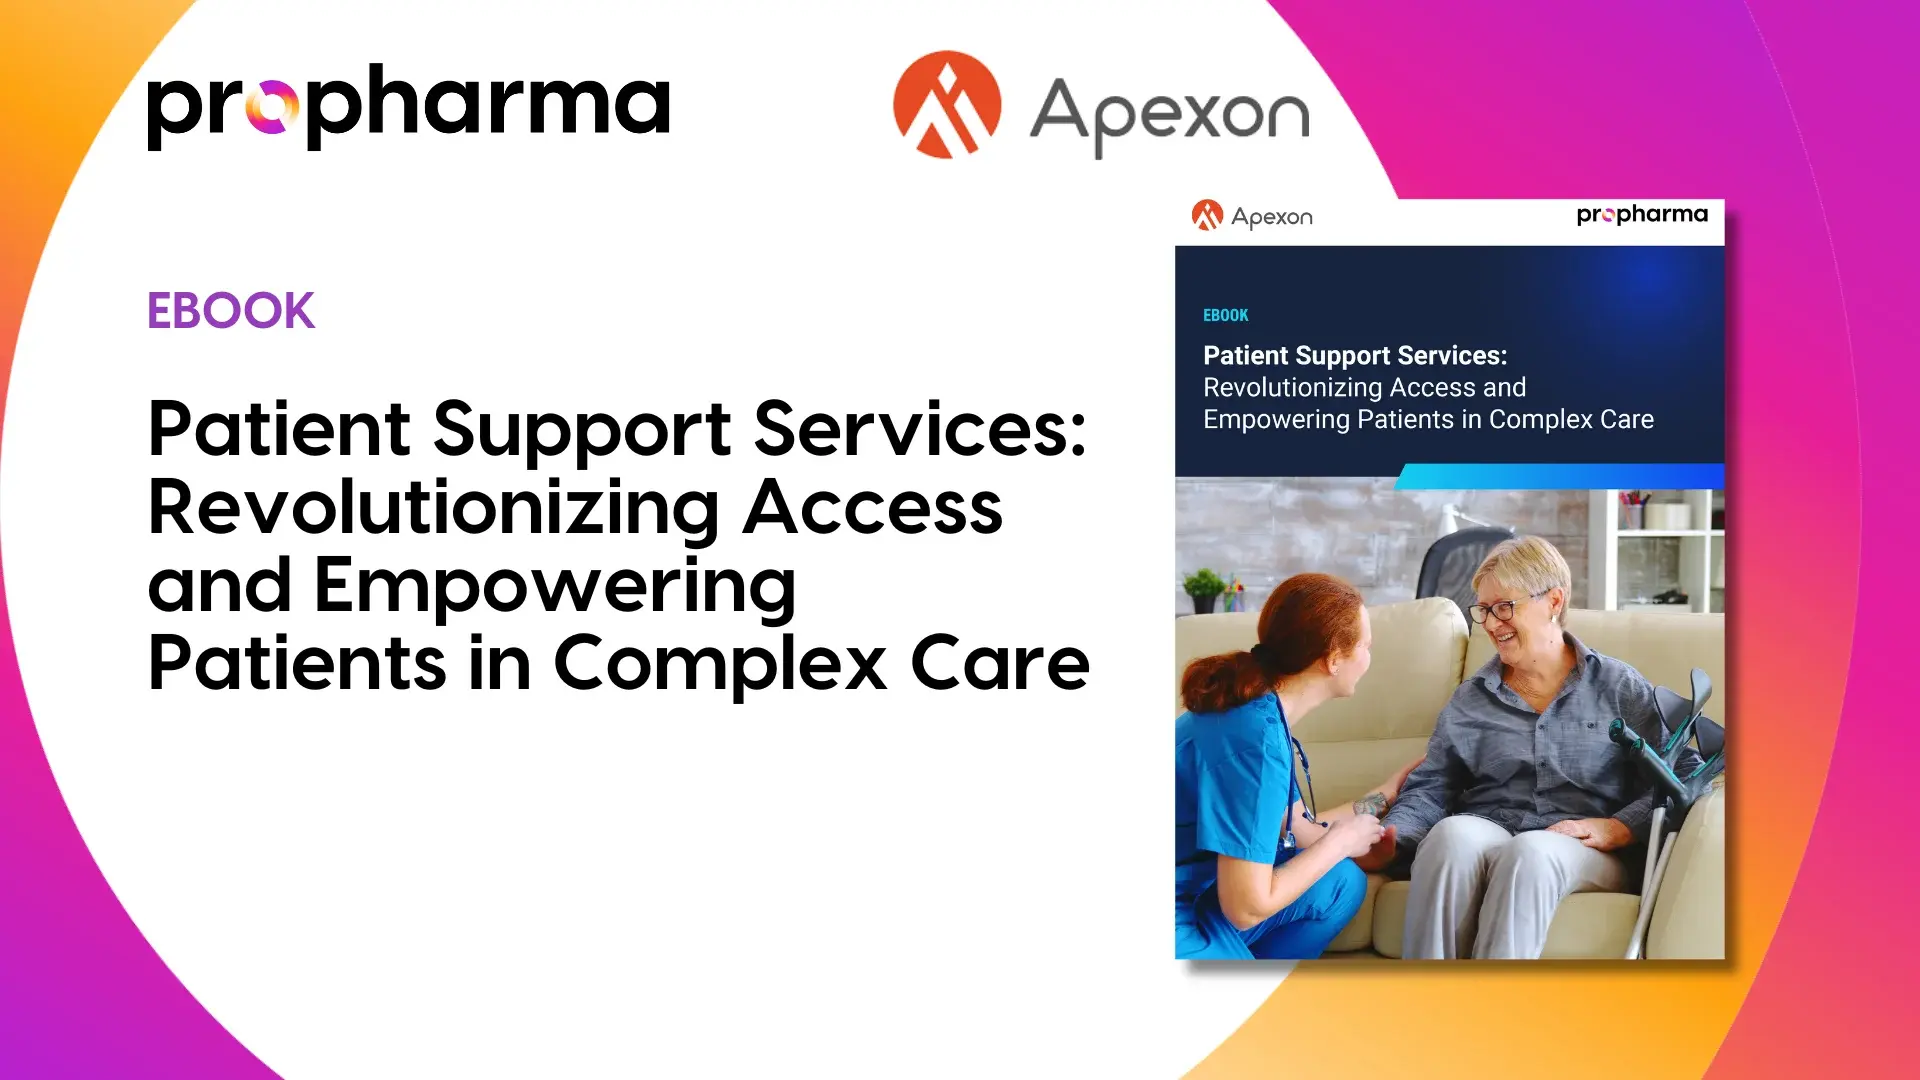 Patient Support Services: Revolutionizing Access and Empowering Patients in Complex Care